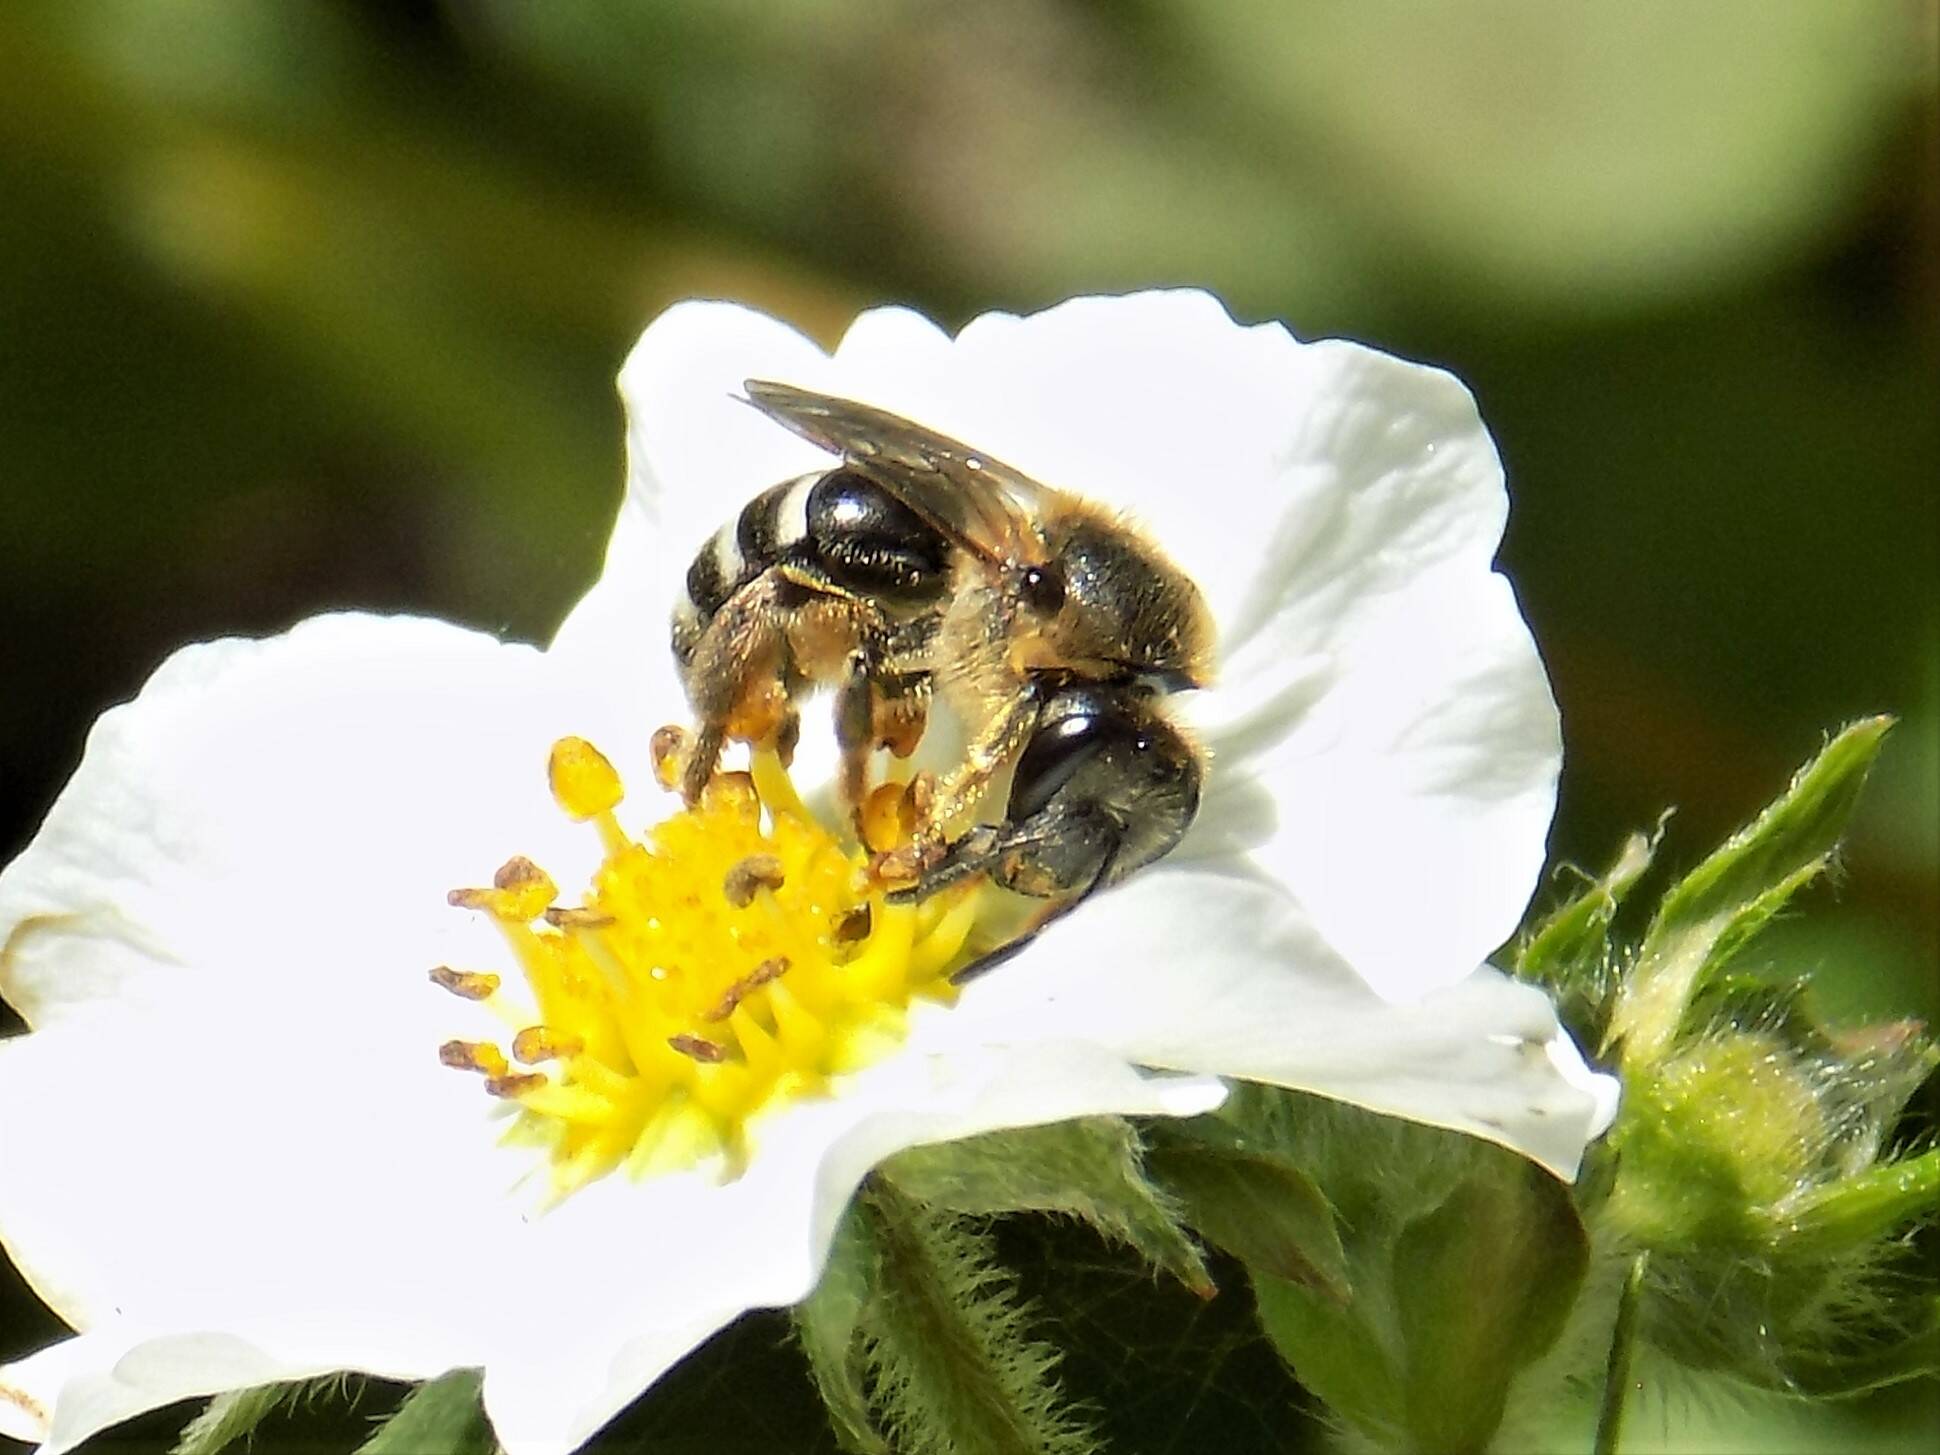 Contributed photo by Russel Barsh
Halictus tripartitus enjoying a woodland strawberry flower in the author’s garden.